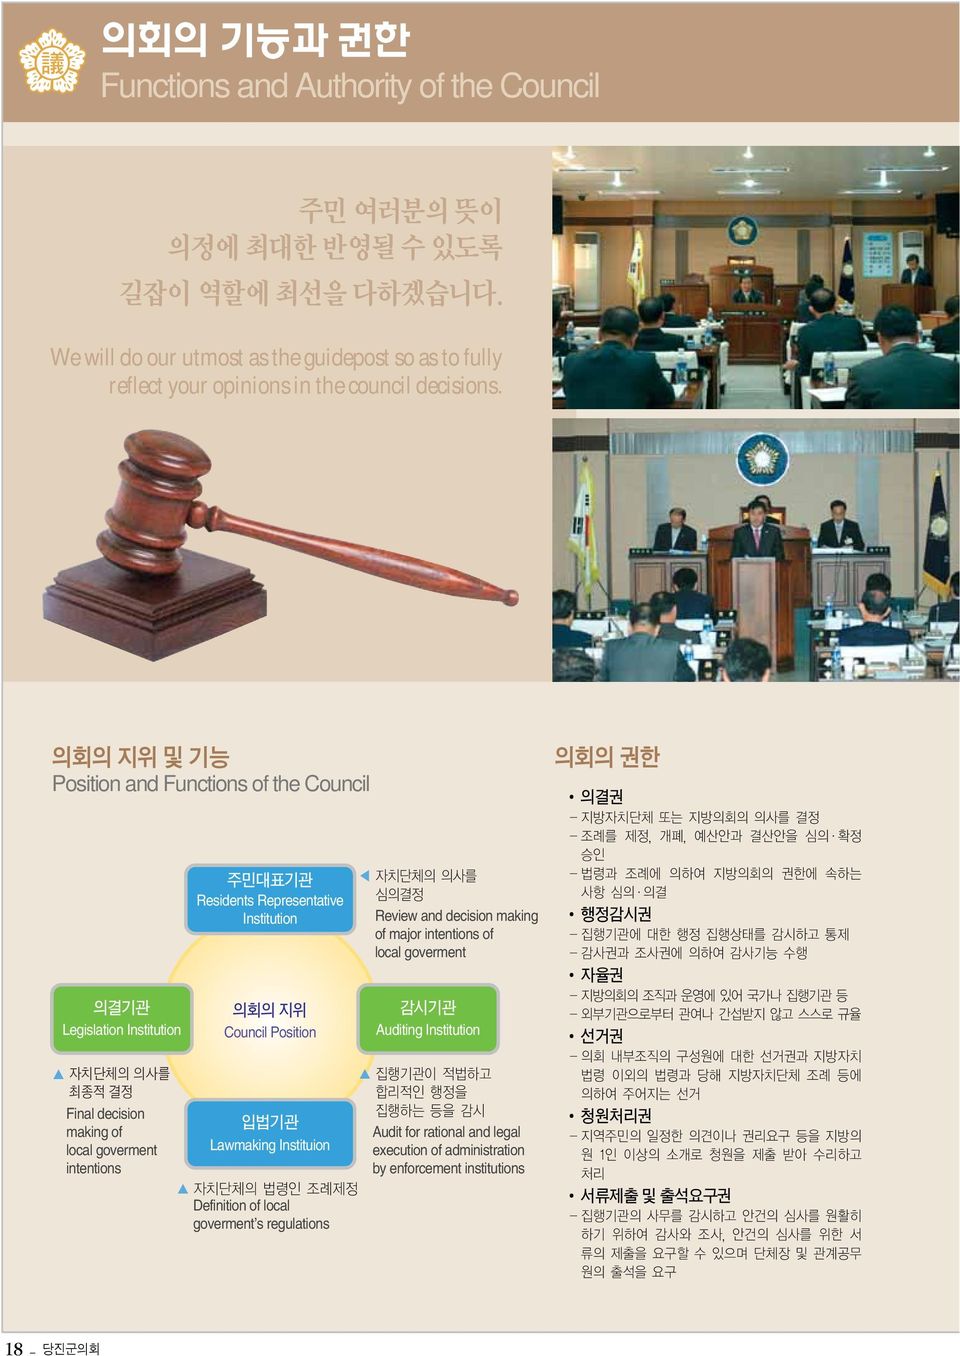 Council Position 입법기관 Lawmaking Instituion 자치단체의 법령인 조례제정 Definition of local goverment s regulations 자치단체의 의사를 심의결정 Review and decision making of major intentions of local goverment 감시기관 Auditing